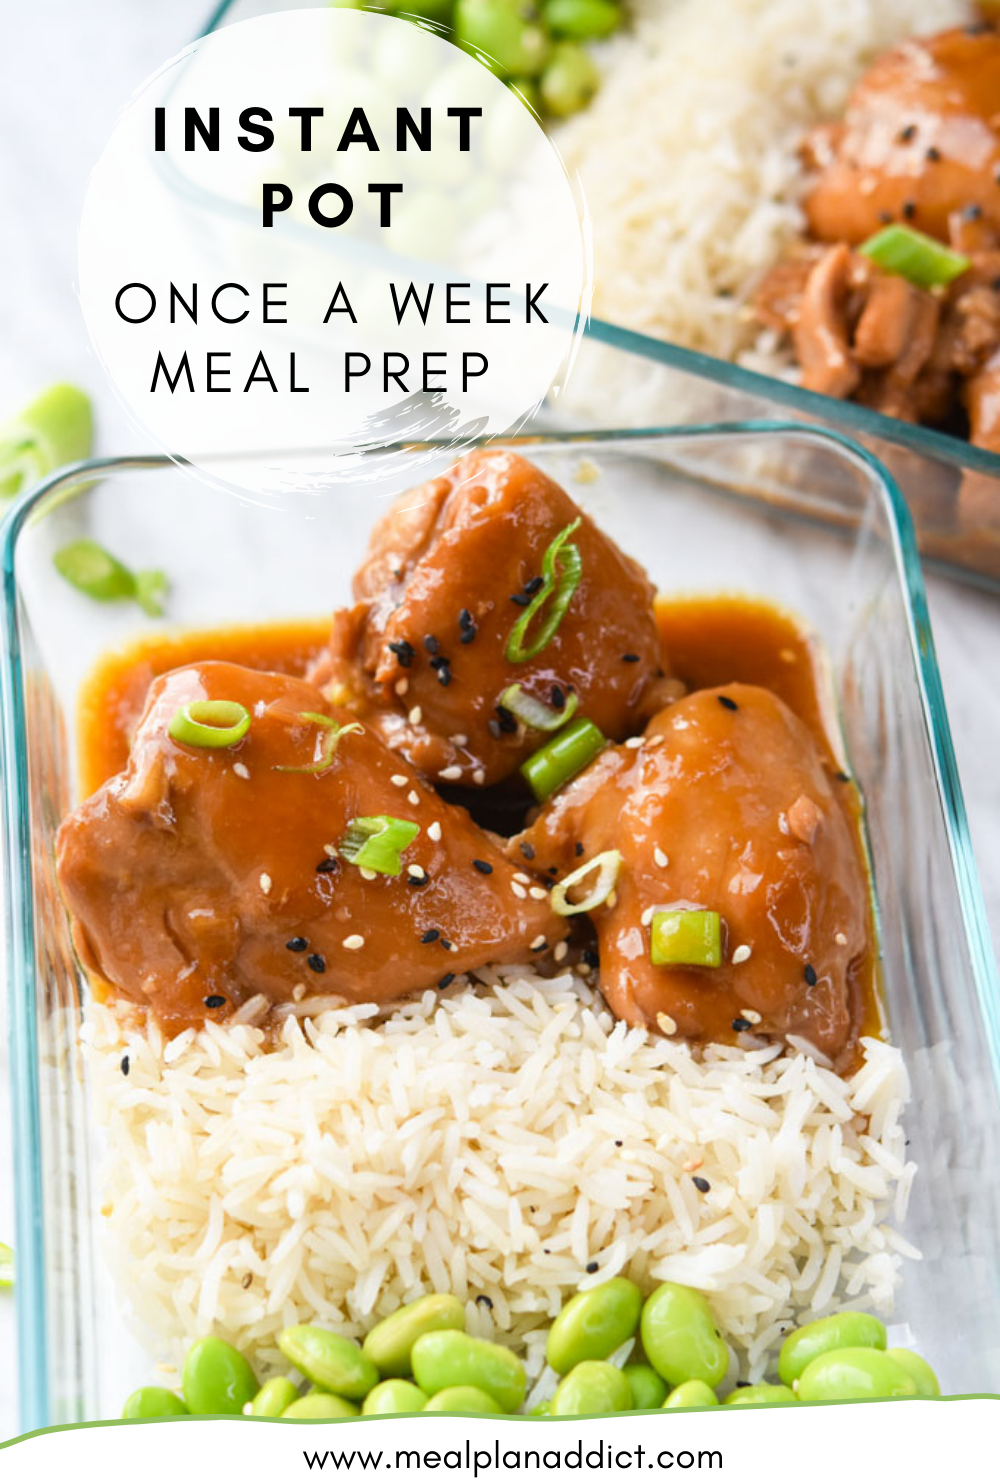 Instant Pot Once a Week Meal Prep